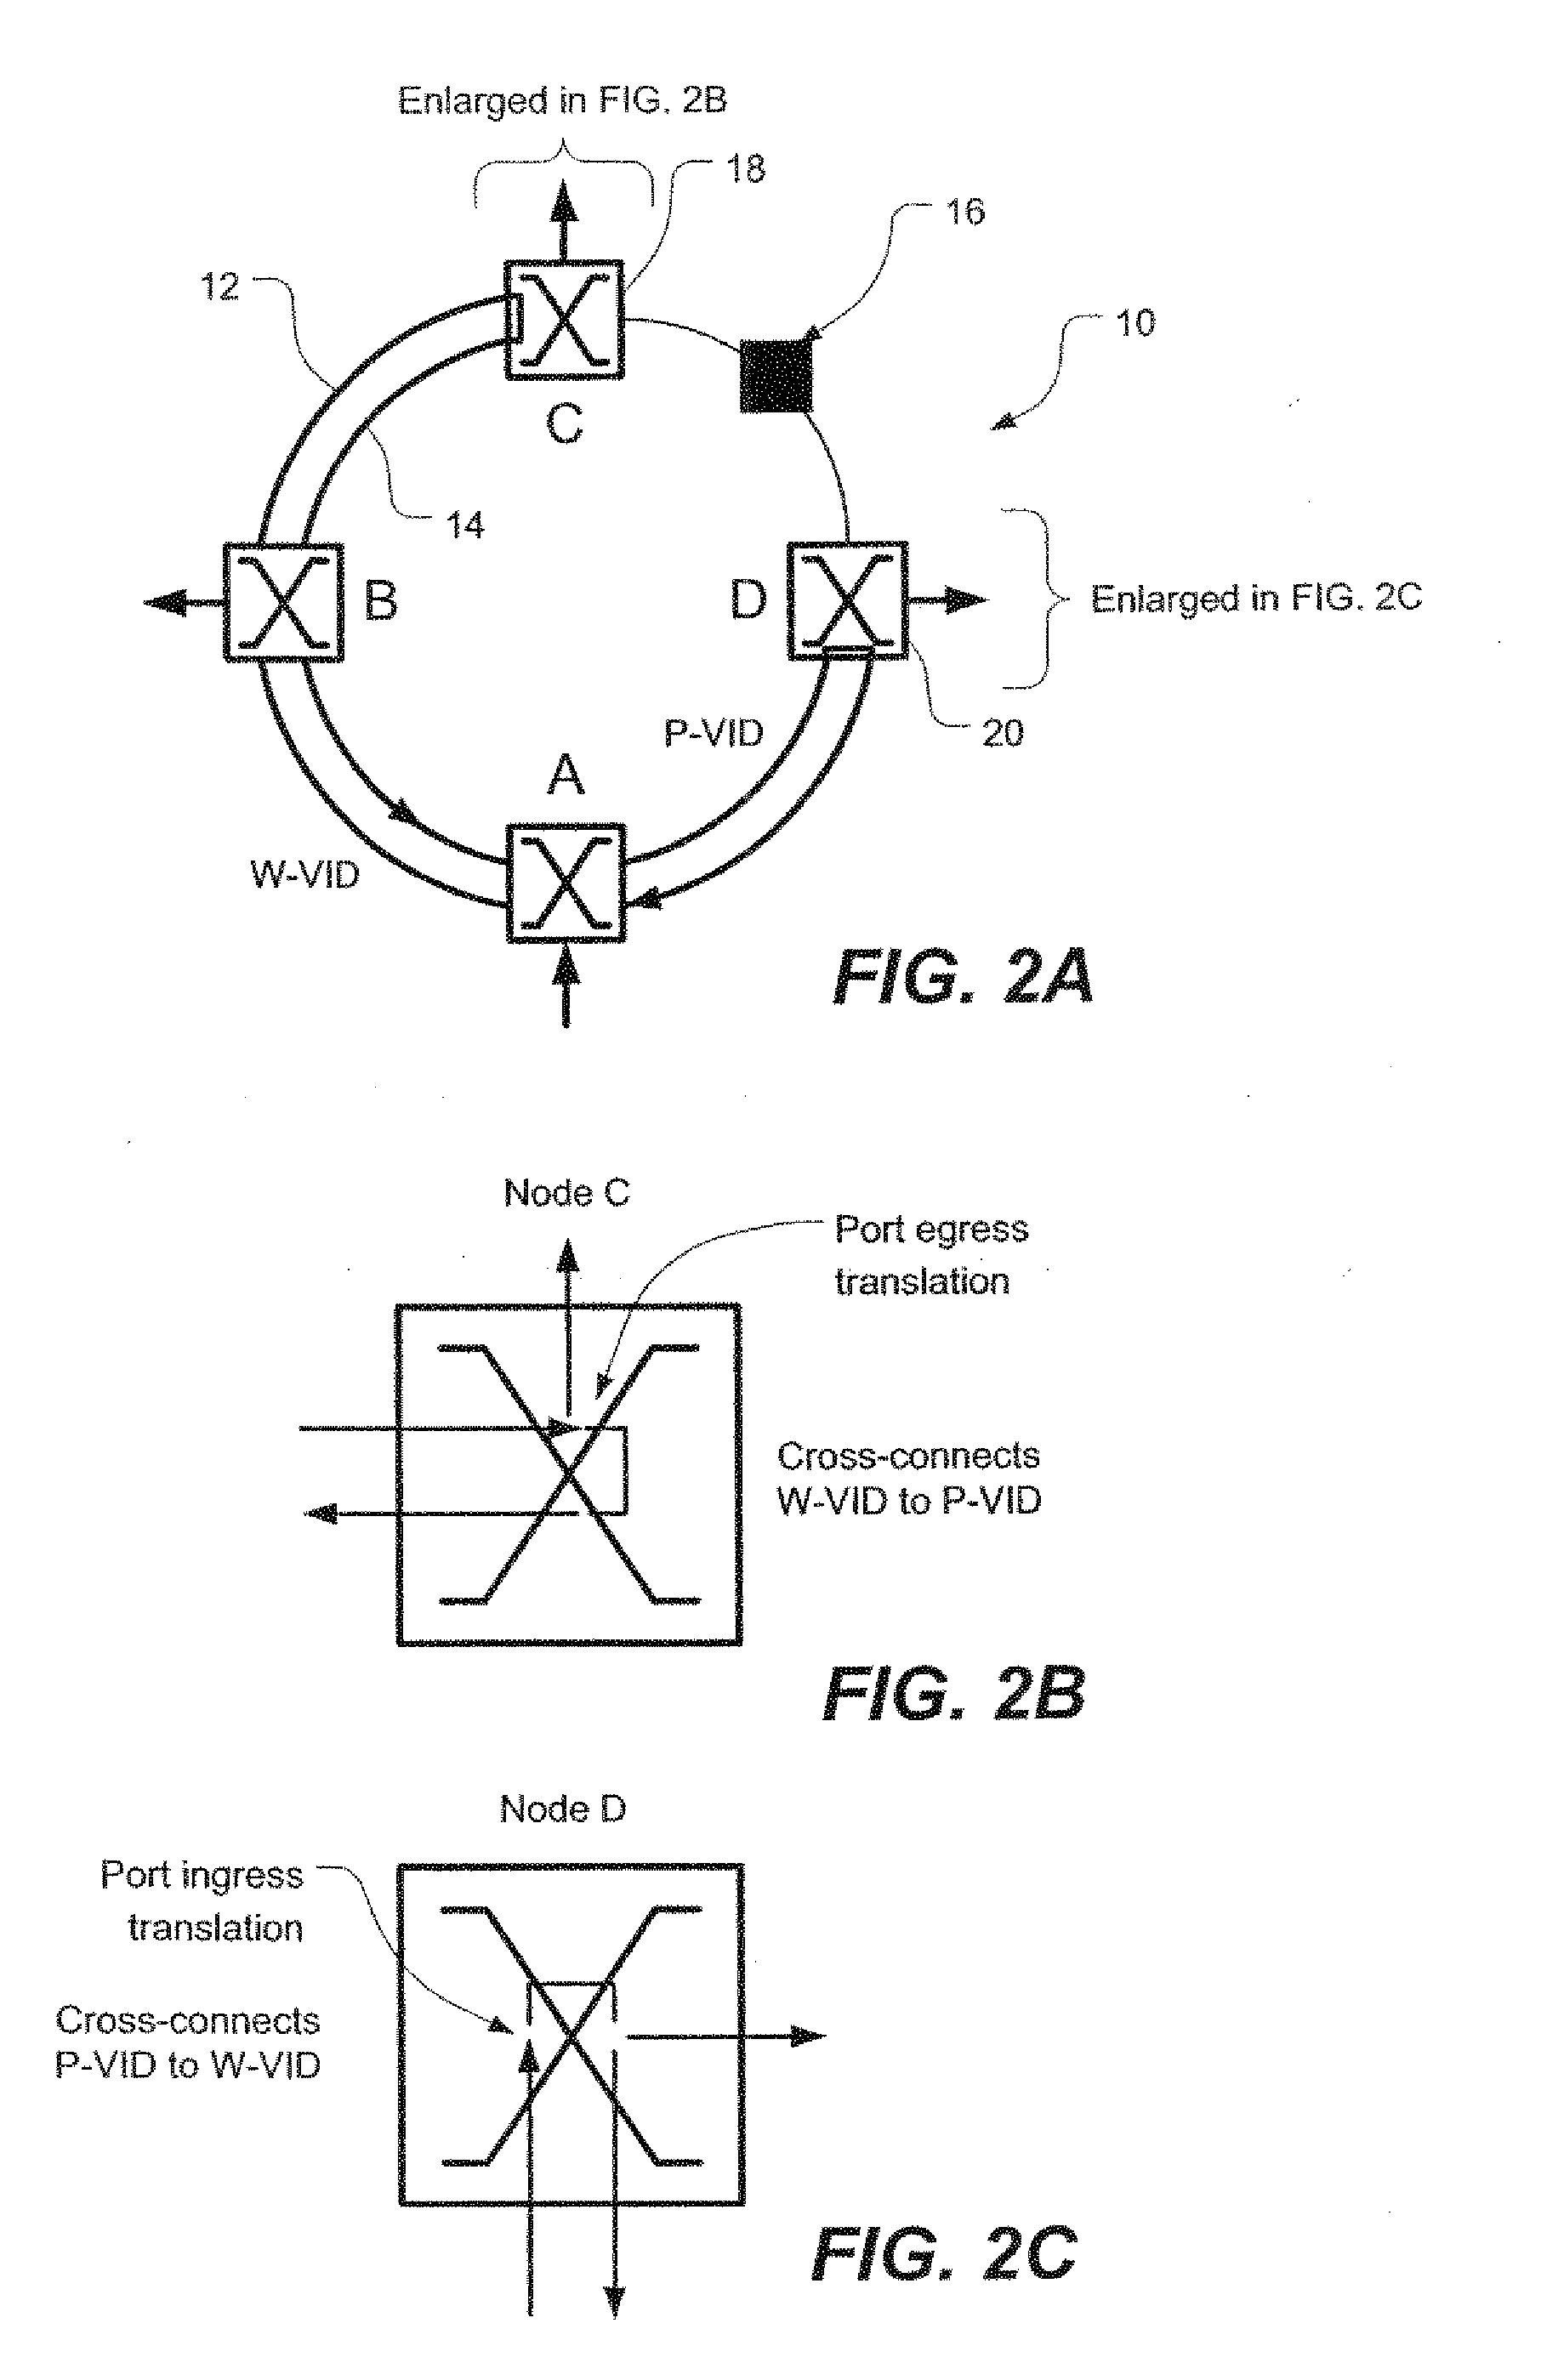 Method and system for looping back traffic in qiq ethernet rings and 1:1 protected PBT trunks